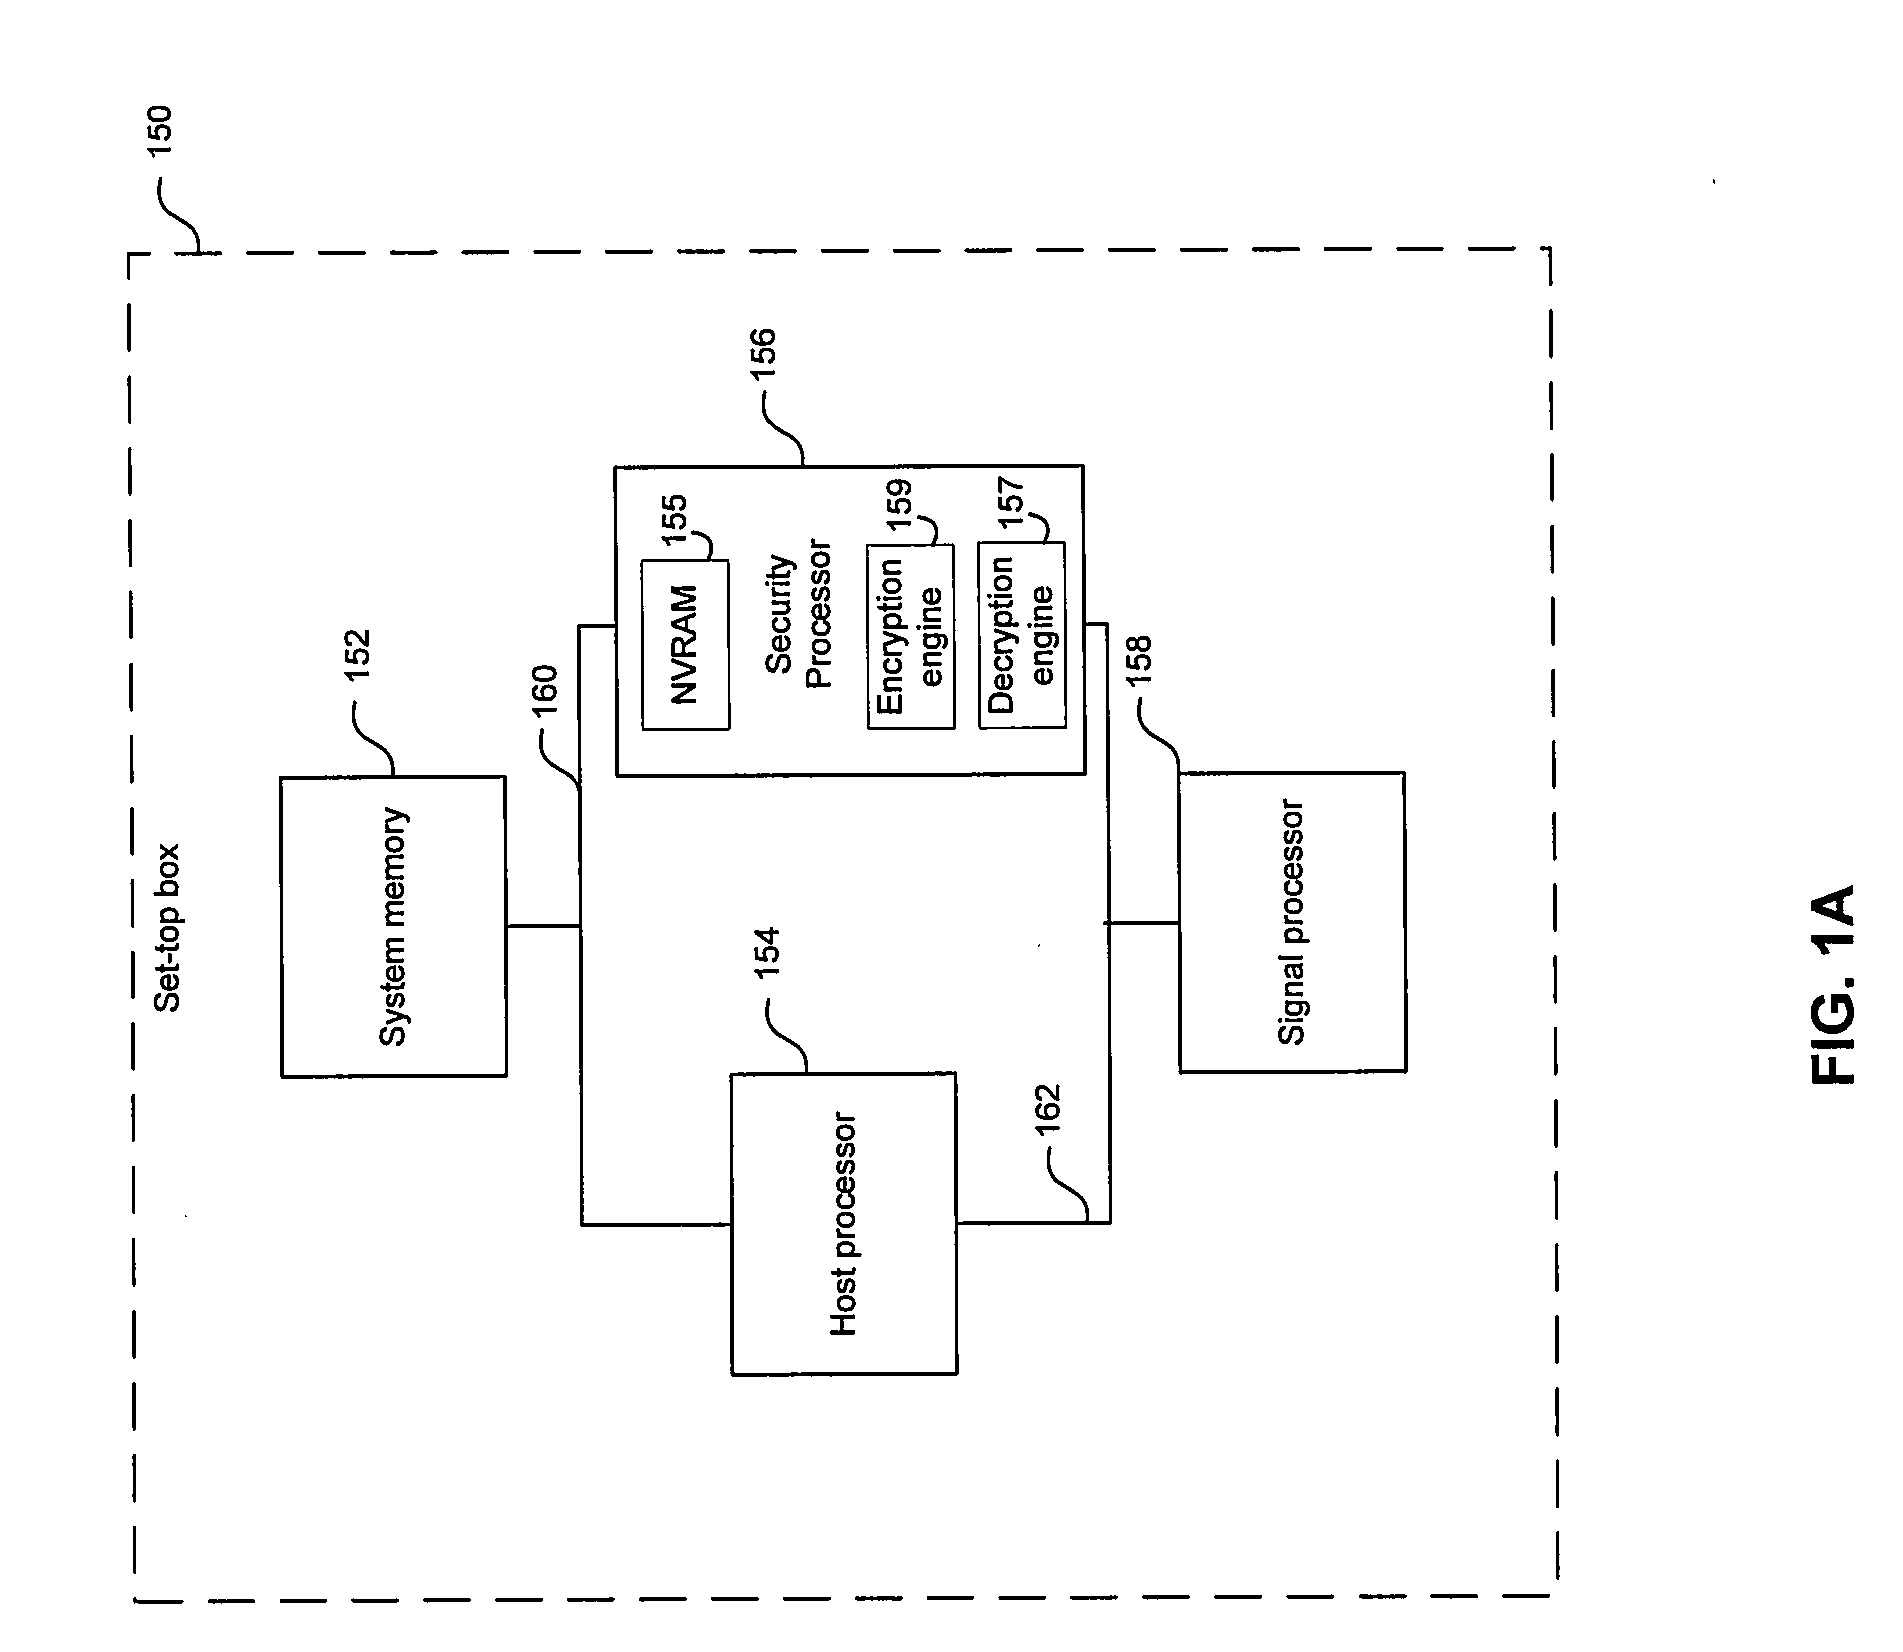 Method and System for Improved Fault Tolerance in Distributed Customization Controls Using Non-Volatile Memory